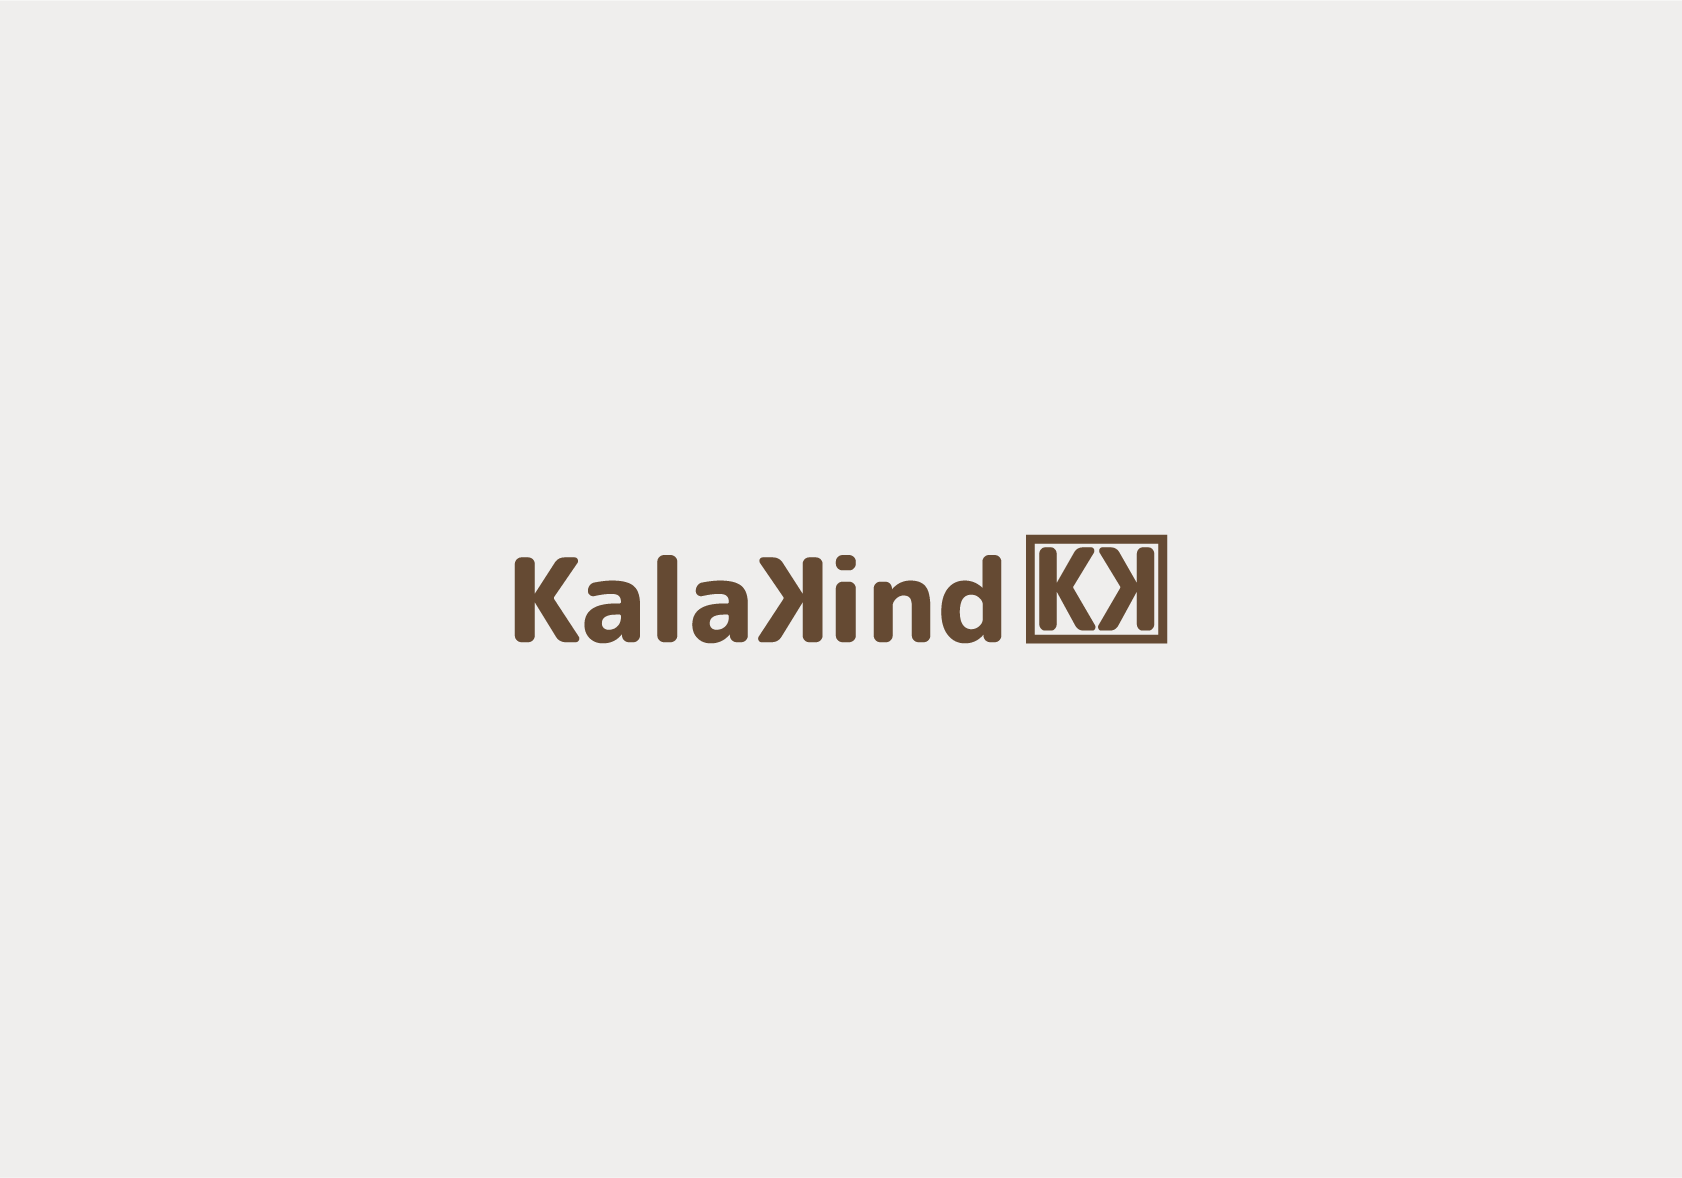 Proyecto Kalakind Plannet, Diseño Editorial, Manal Formativo, Web